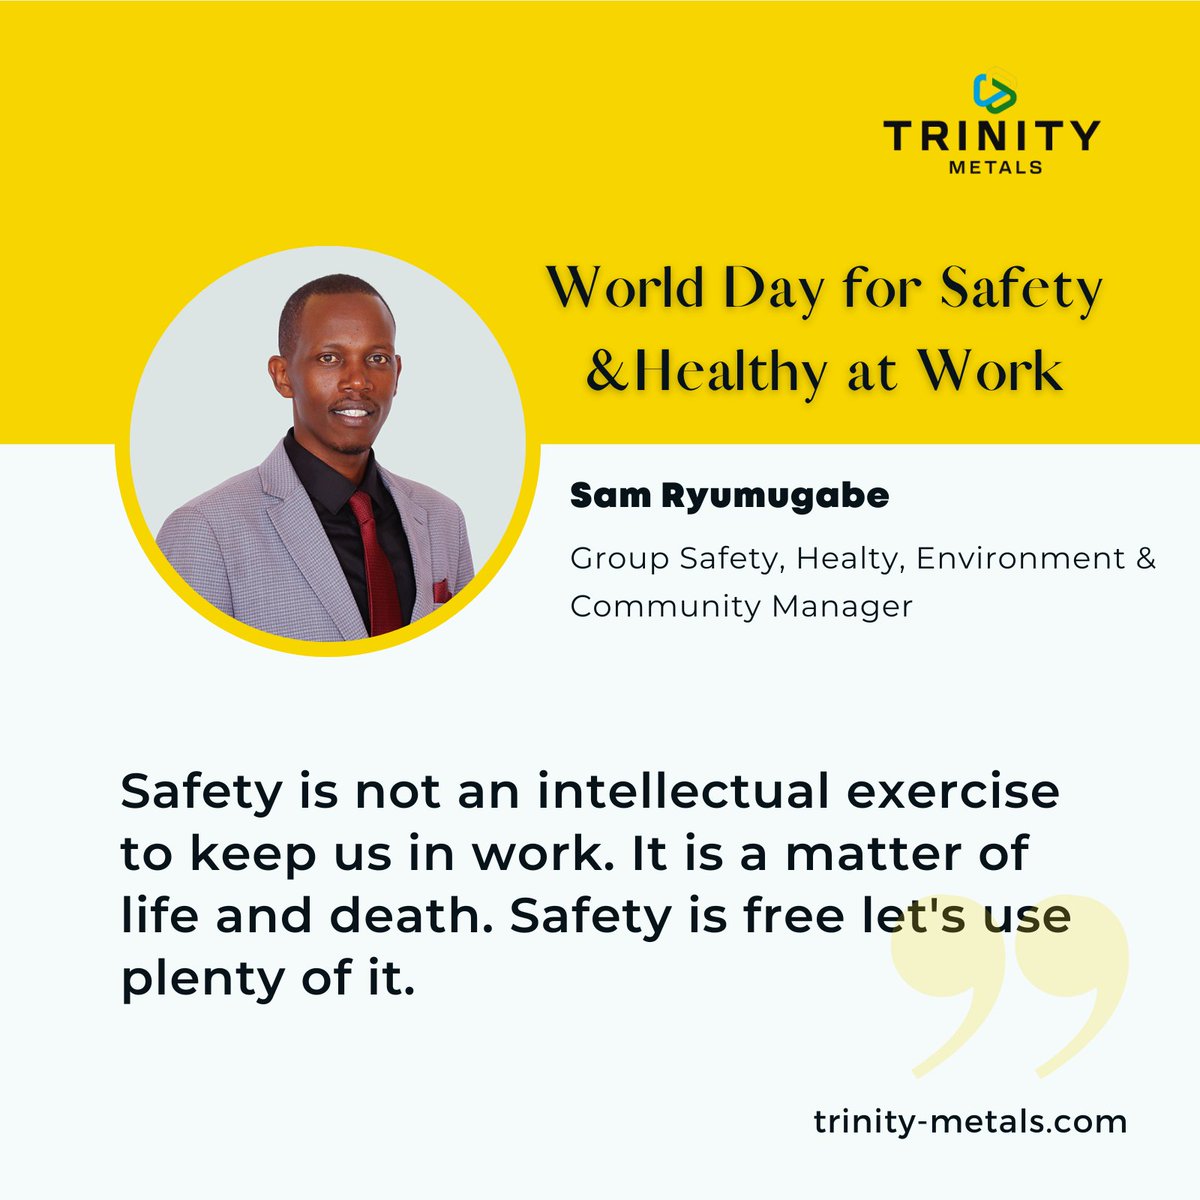 Today is the World Day for Safety and Health at Work.  At Trinity Metals Group, we take Health and Safety seriously, we believe that every employee should go back home safely to their families every day.
#WorldDayforSafetyandHealthAtWork#safetyfirst #trinitymetalsgroup